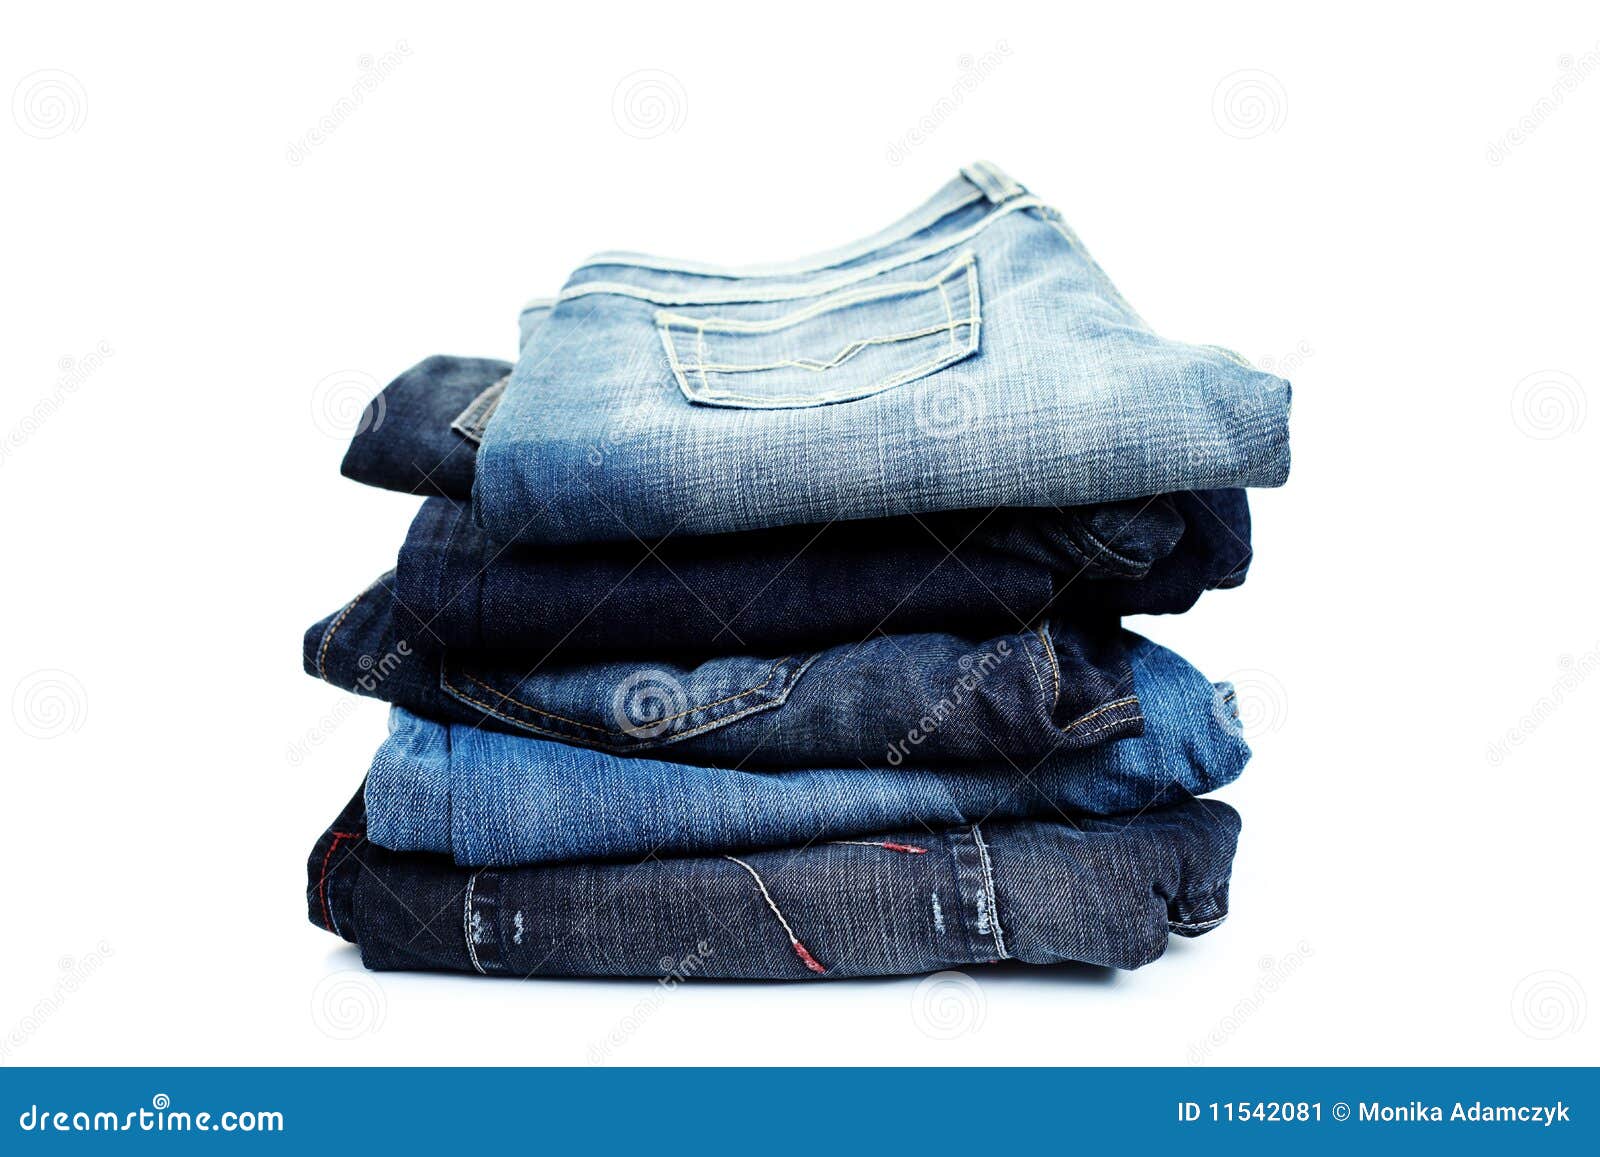 Jeans stock image. Image of pile, garment, cloth, casual - 11542081